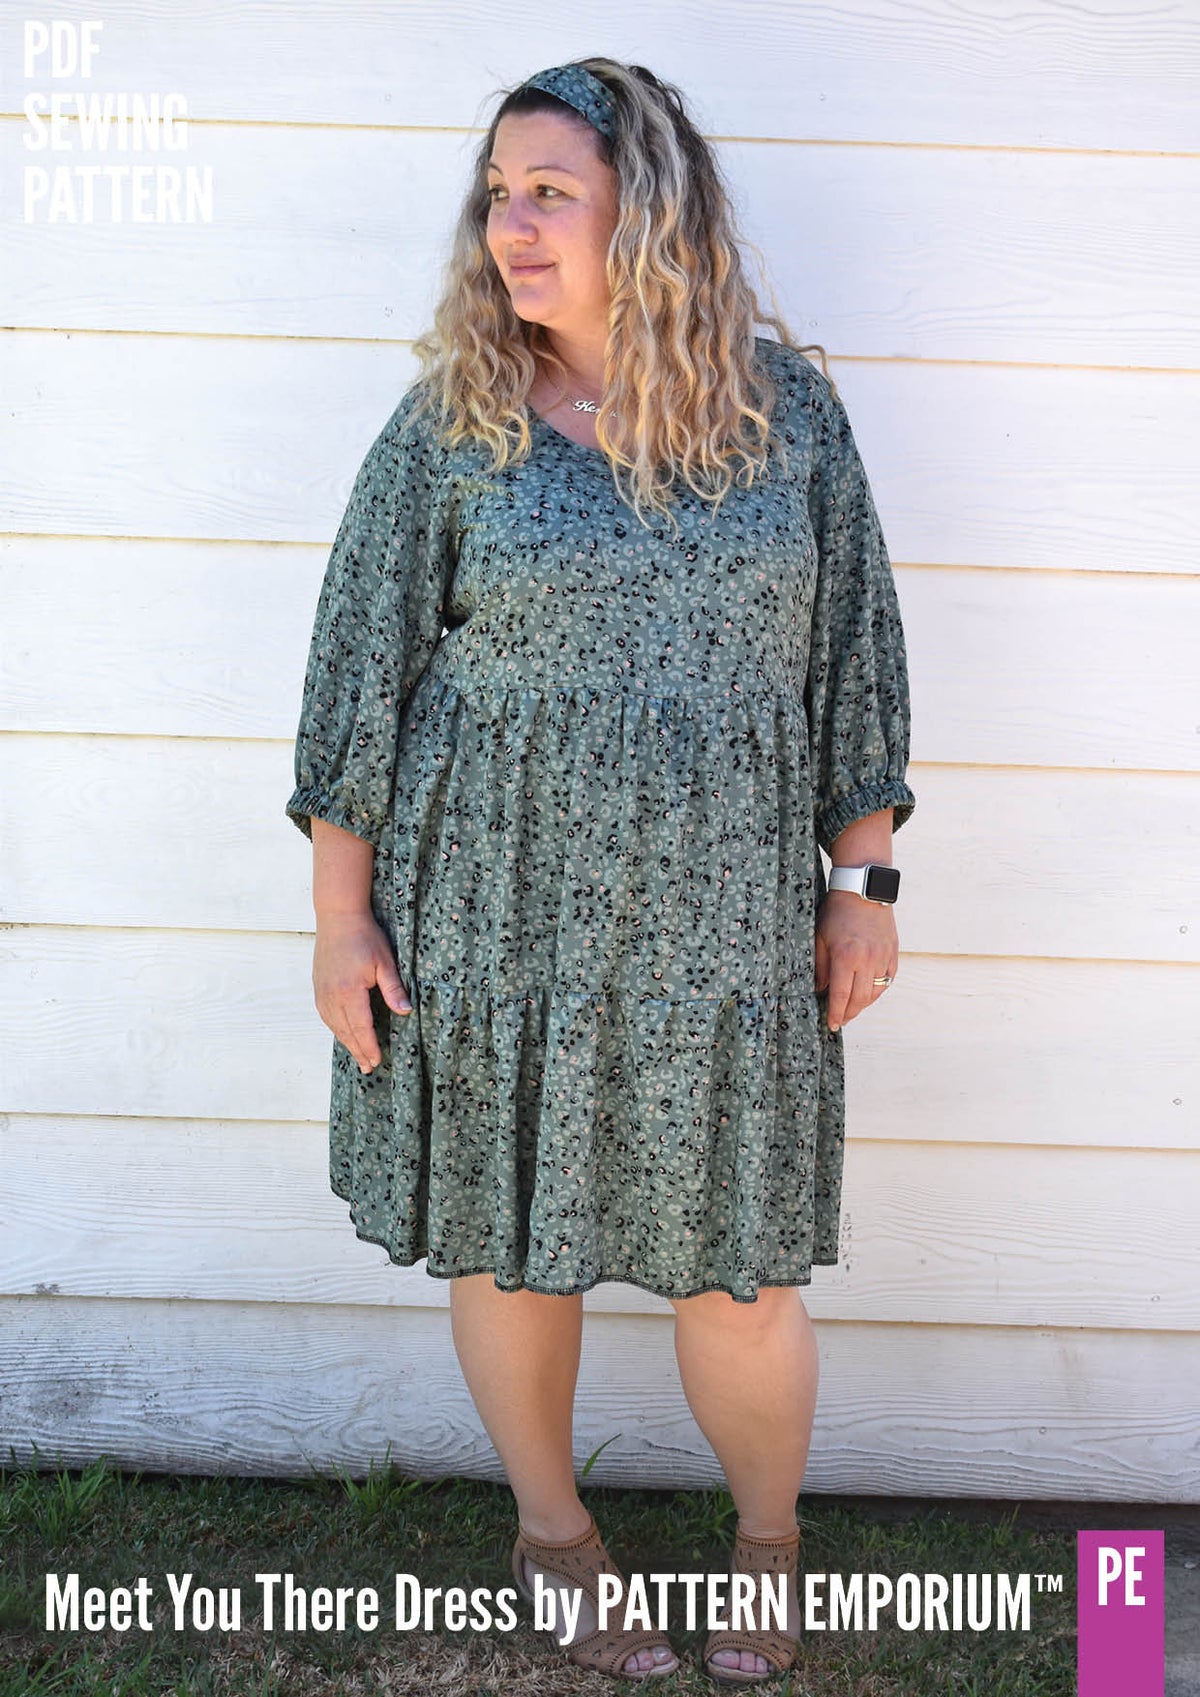 Meet You There Tiered Dress & Top - Pattern Emporium